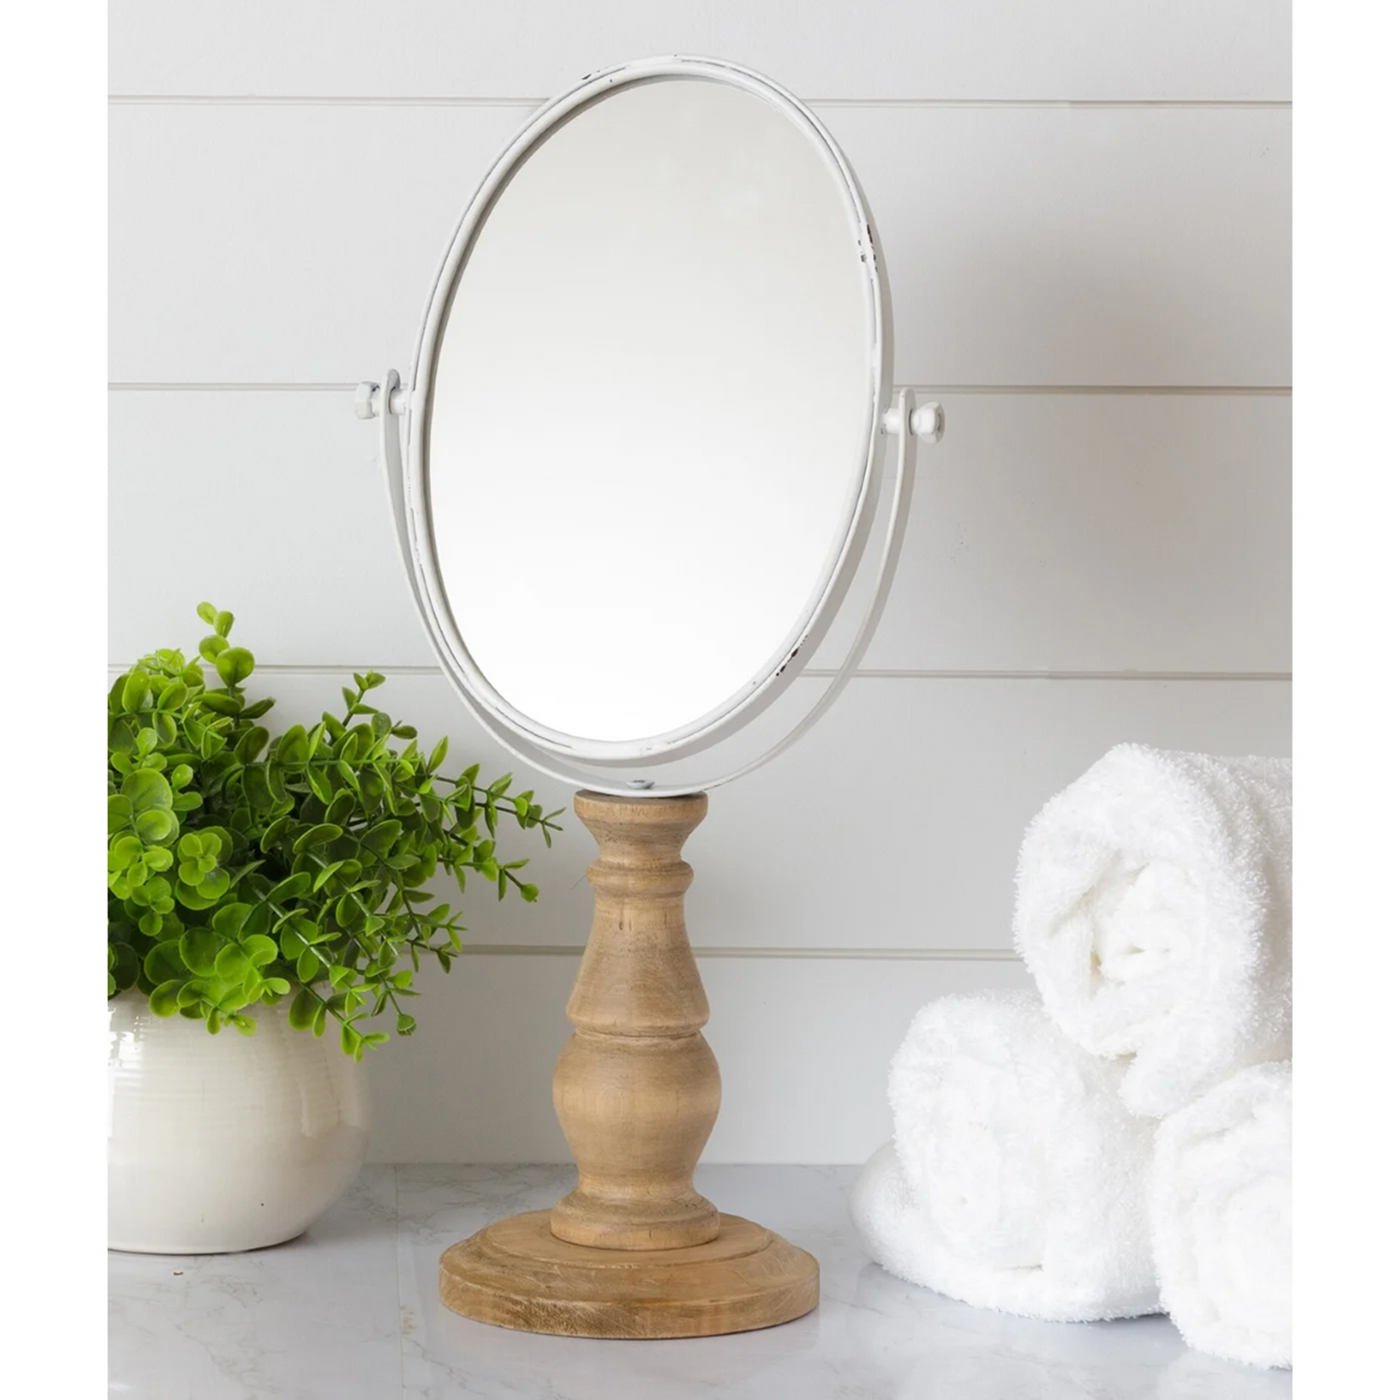 Tabletop Oval Mirror With Wooden Base